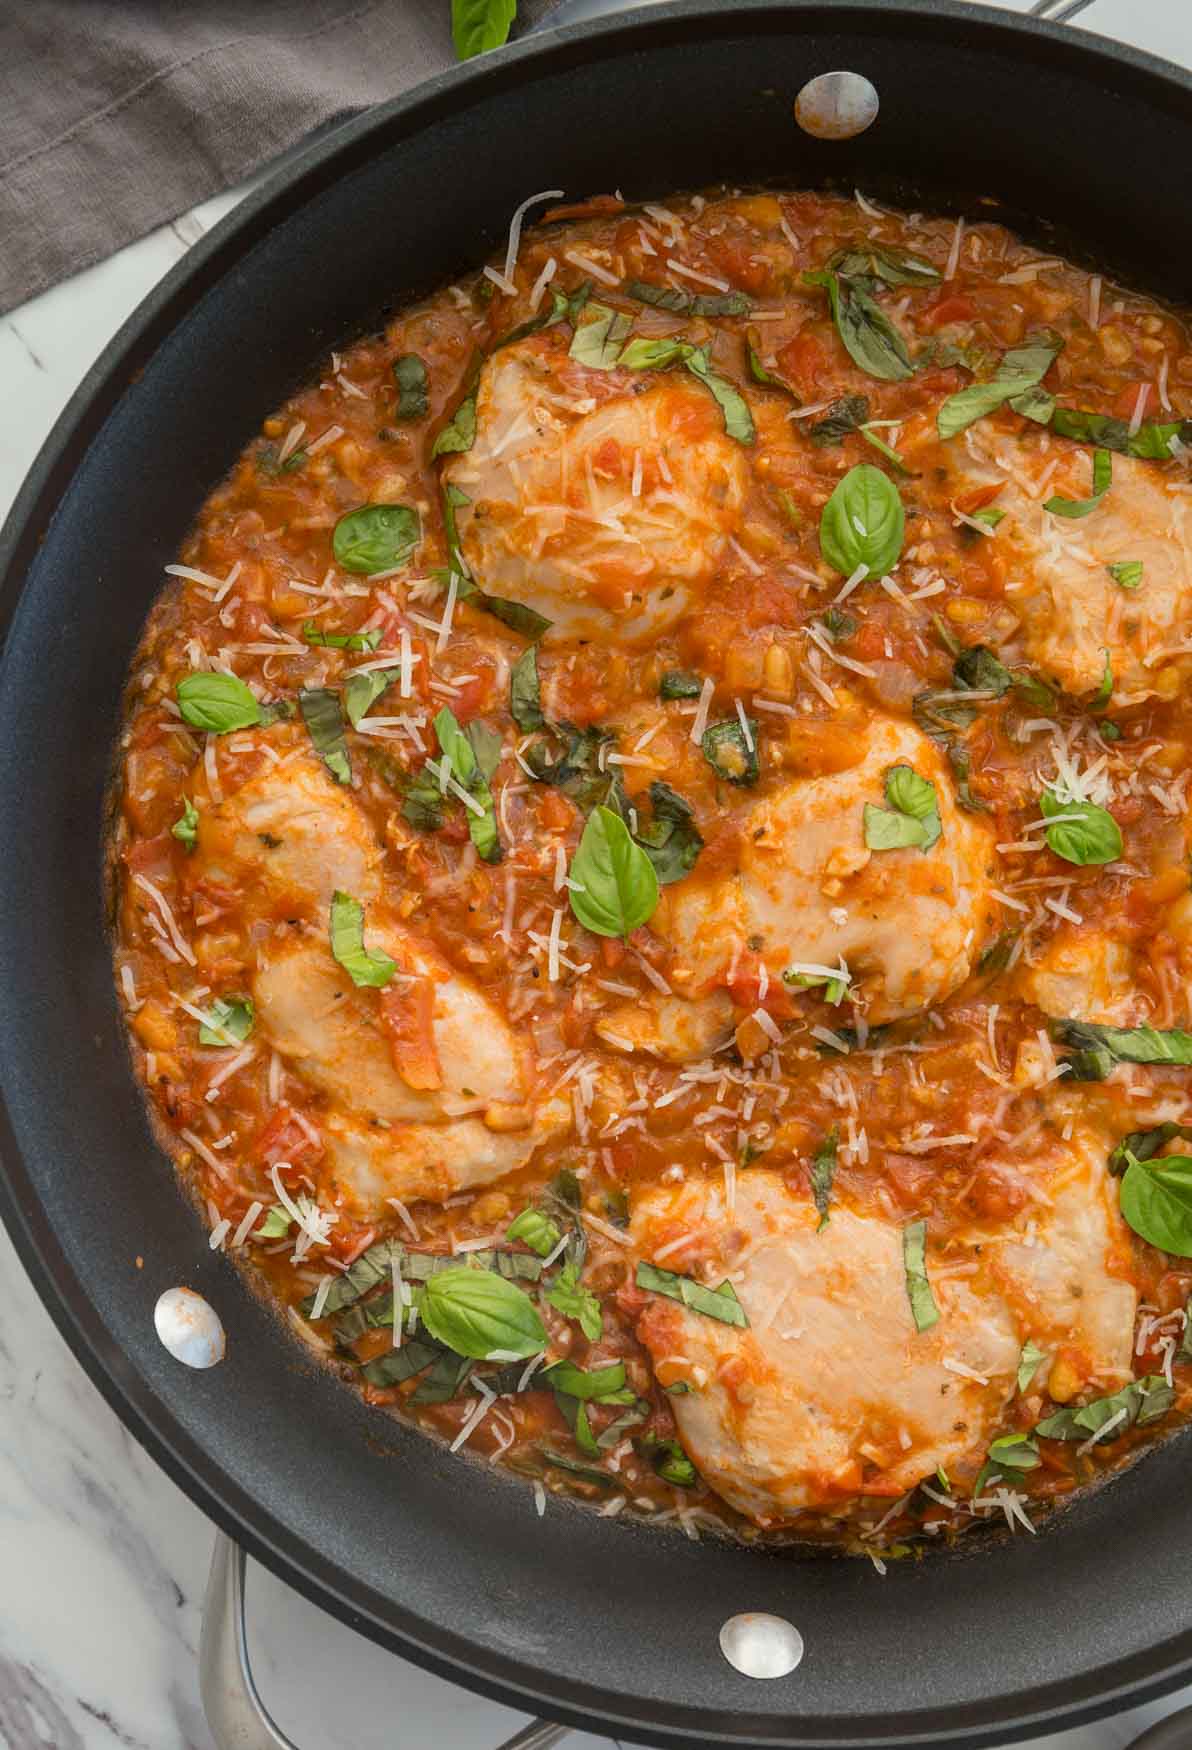 Garlic basil chicken in tomato sauce in a large skillet.